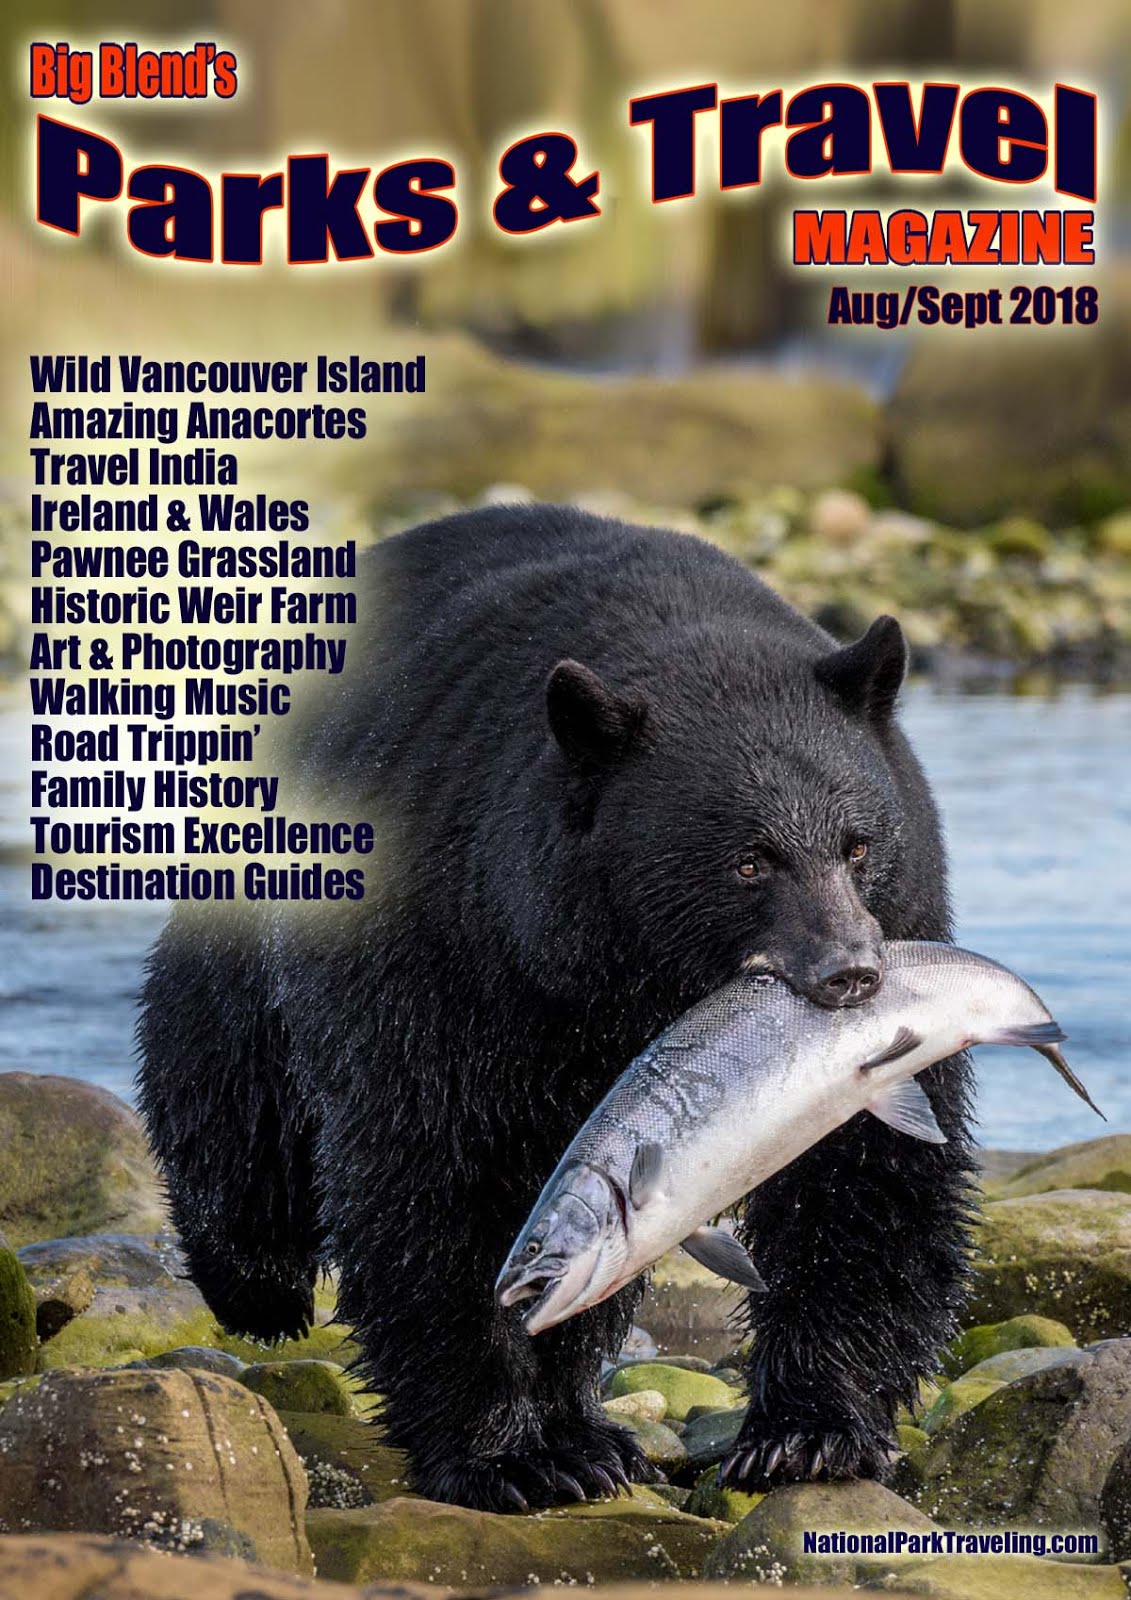 Big Blend's Parks and Travel Magazine